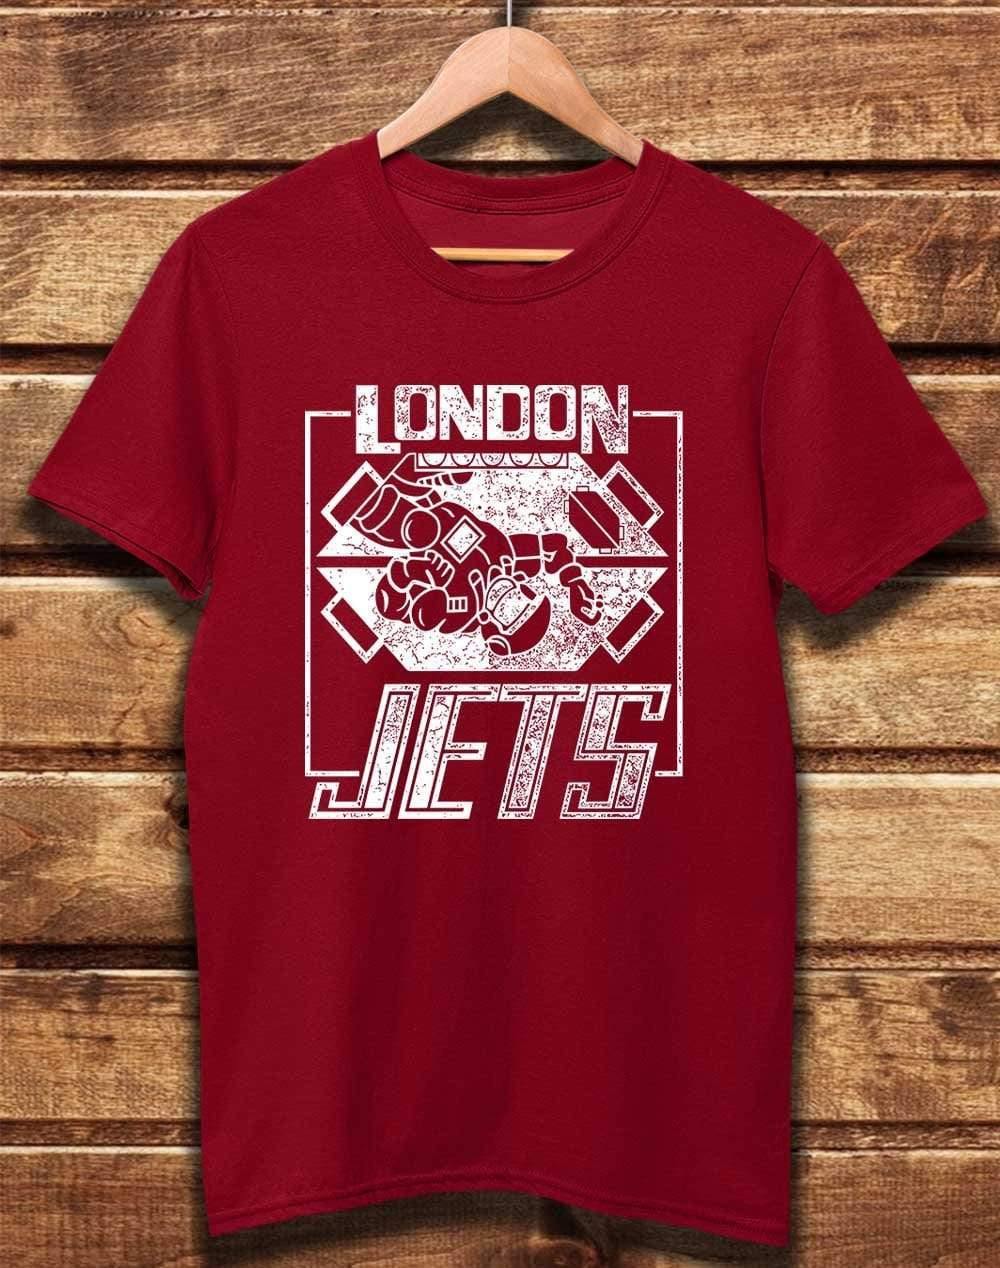 DELUXE London Jets Organic Cotton T-Shirt XS / Dark Red  - Off World Tees